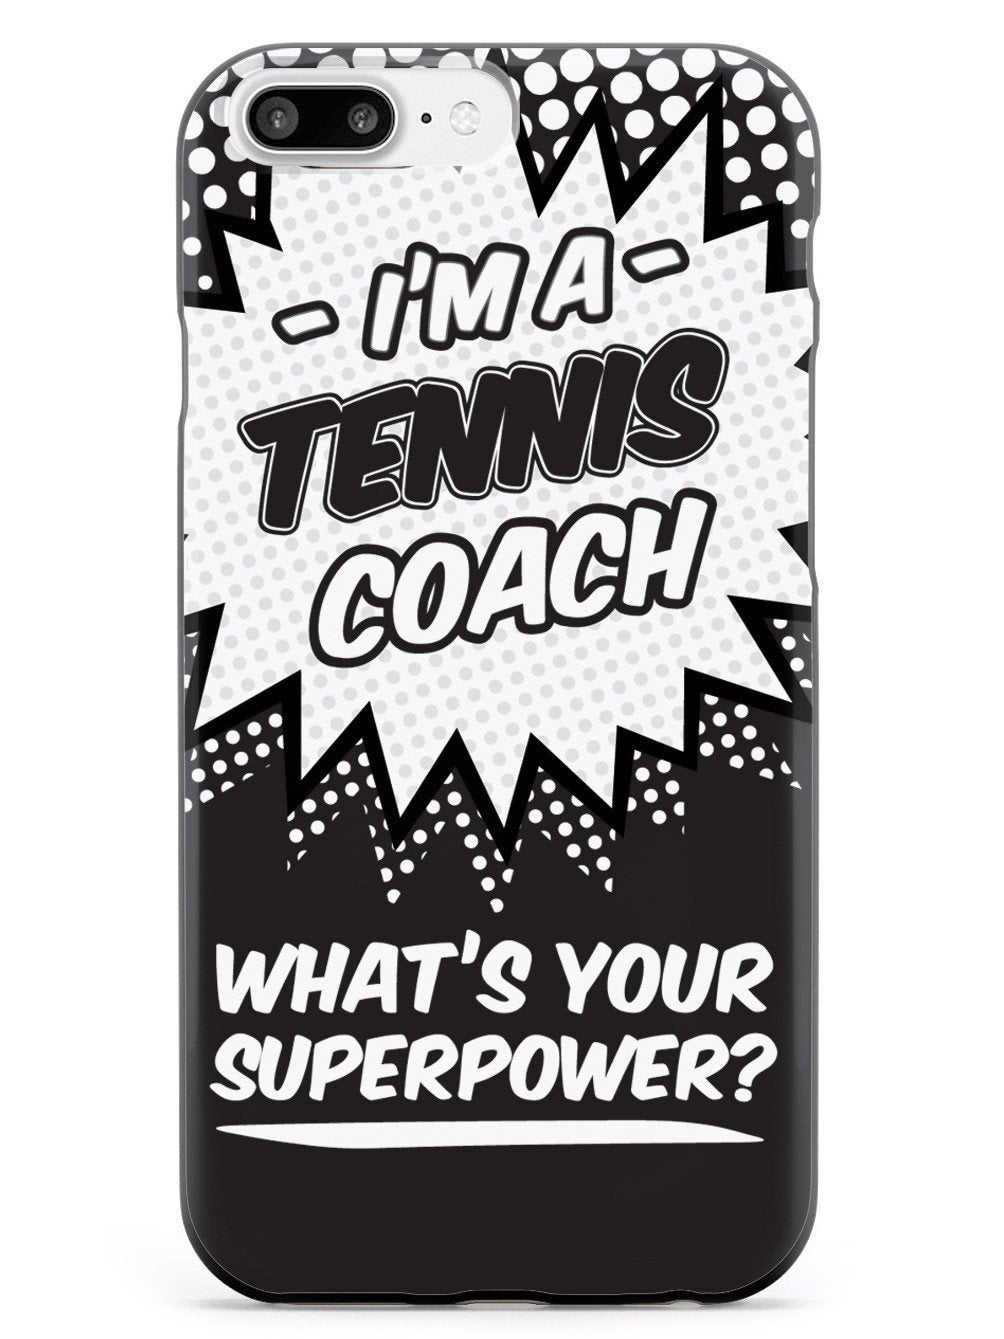 Tennis Coach - What's Your Superpower? Case